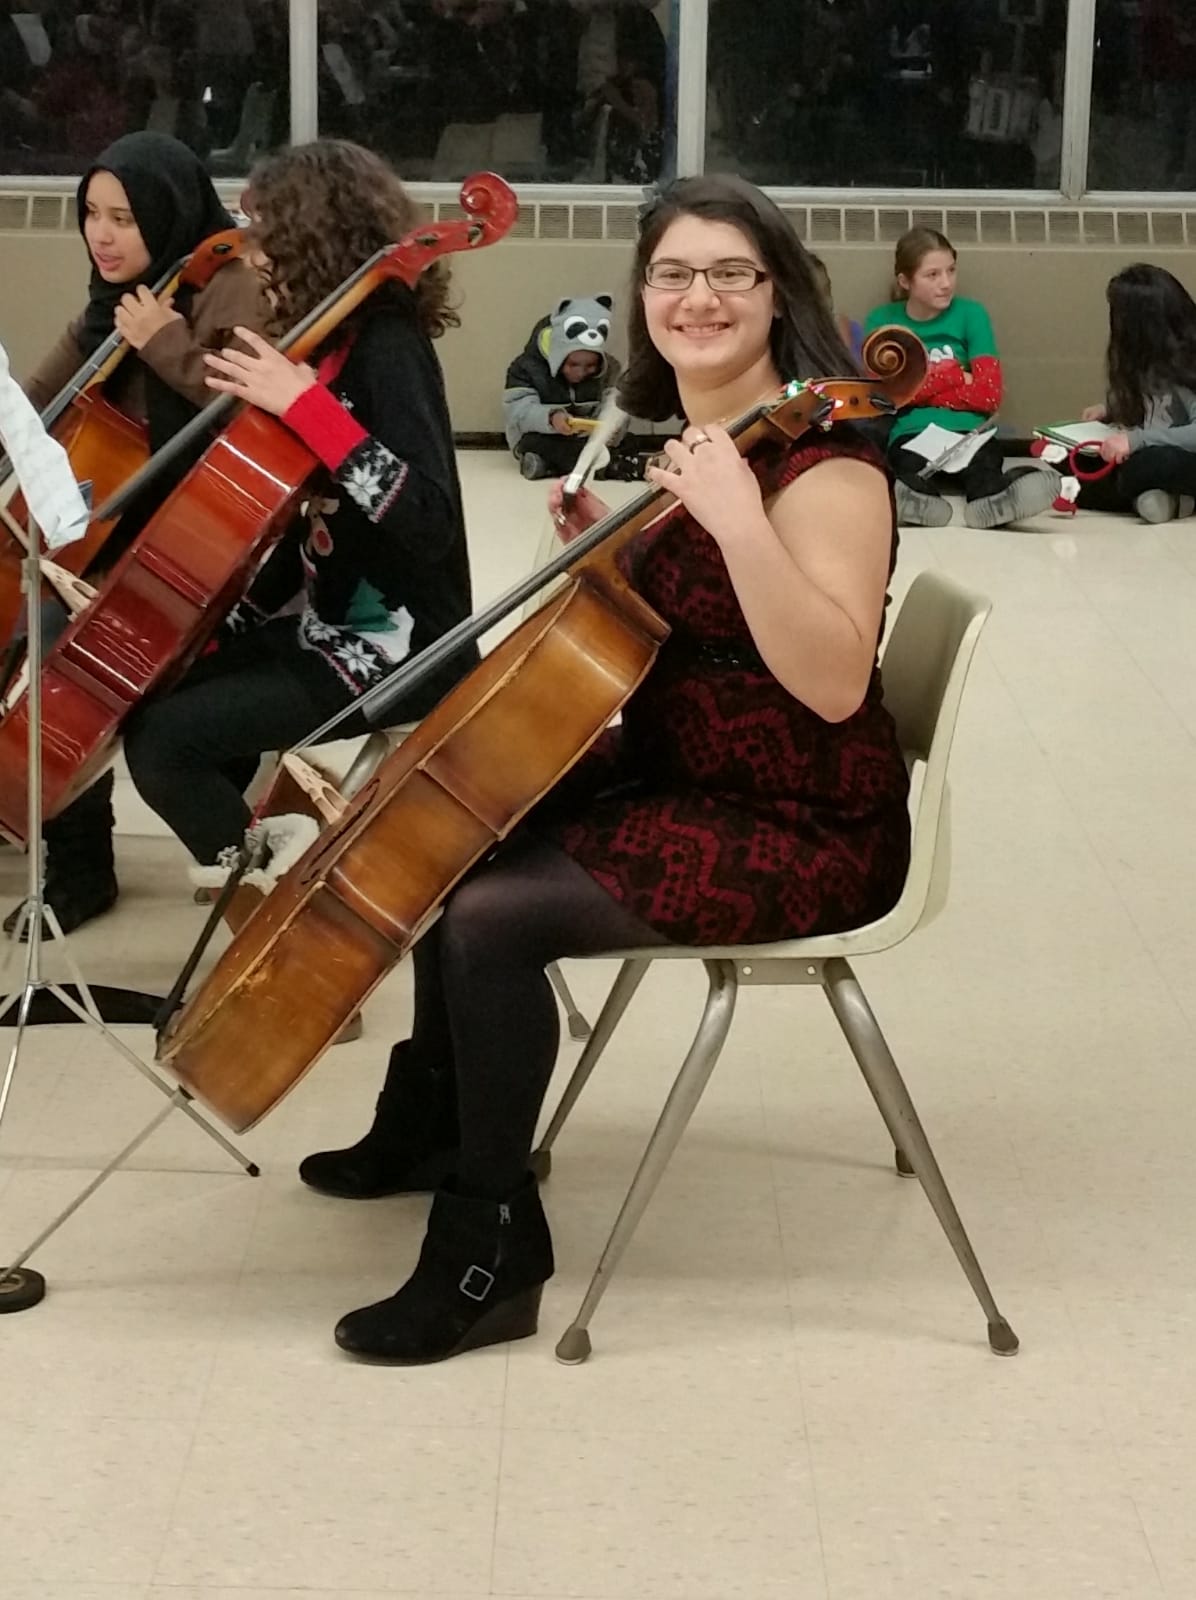 Angela sitting with her cello